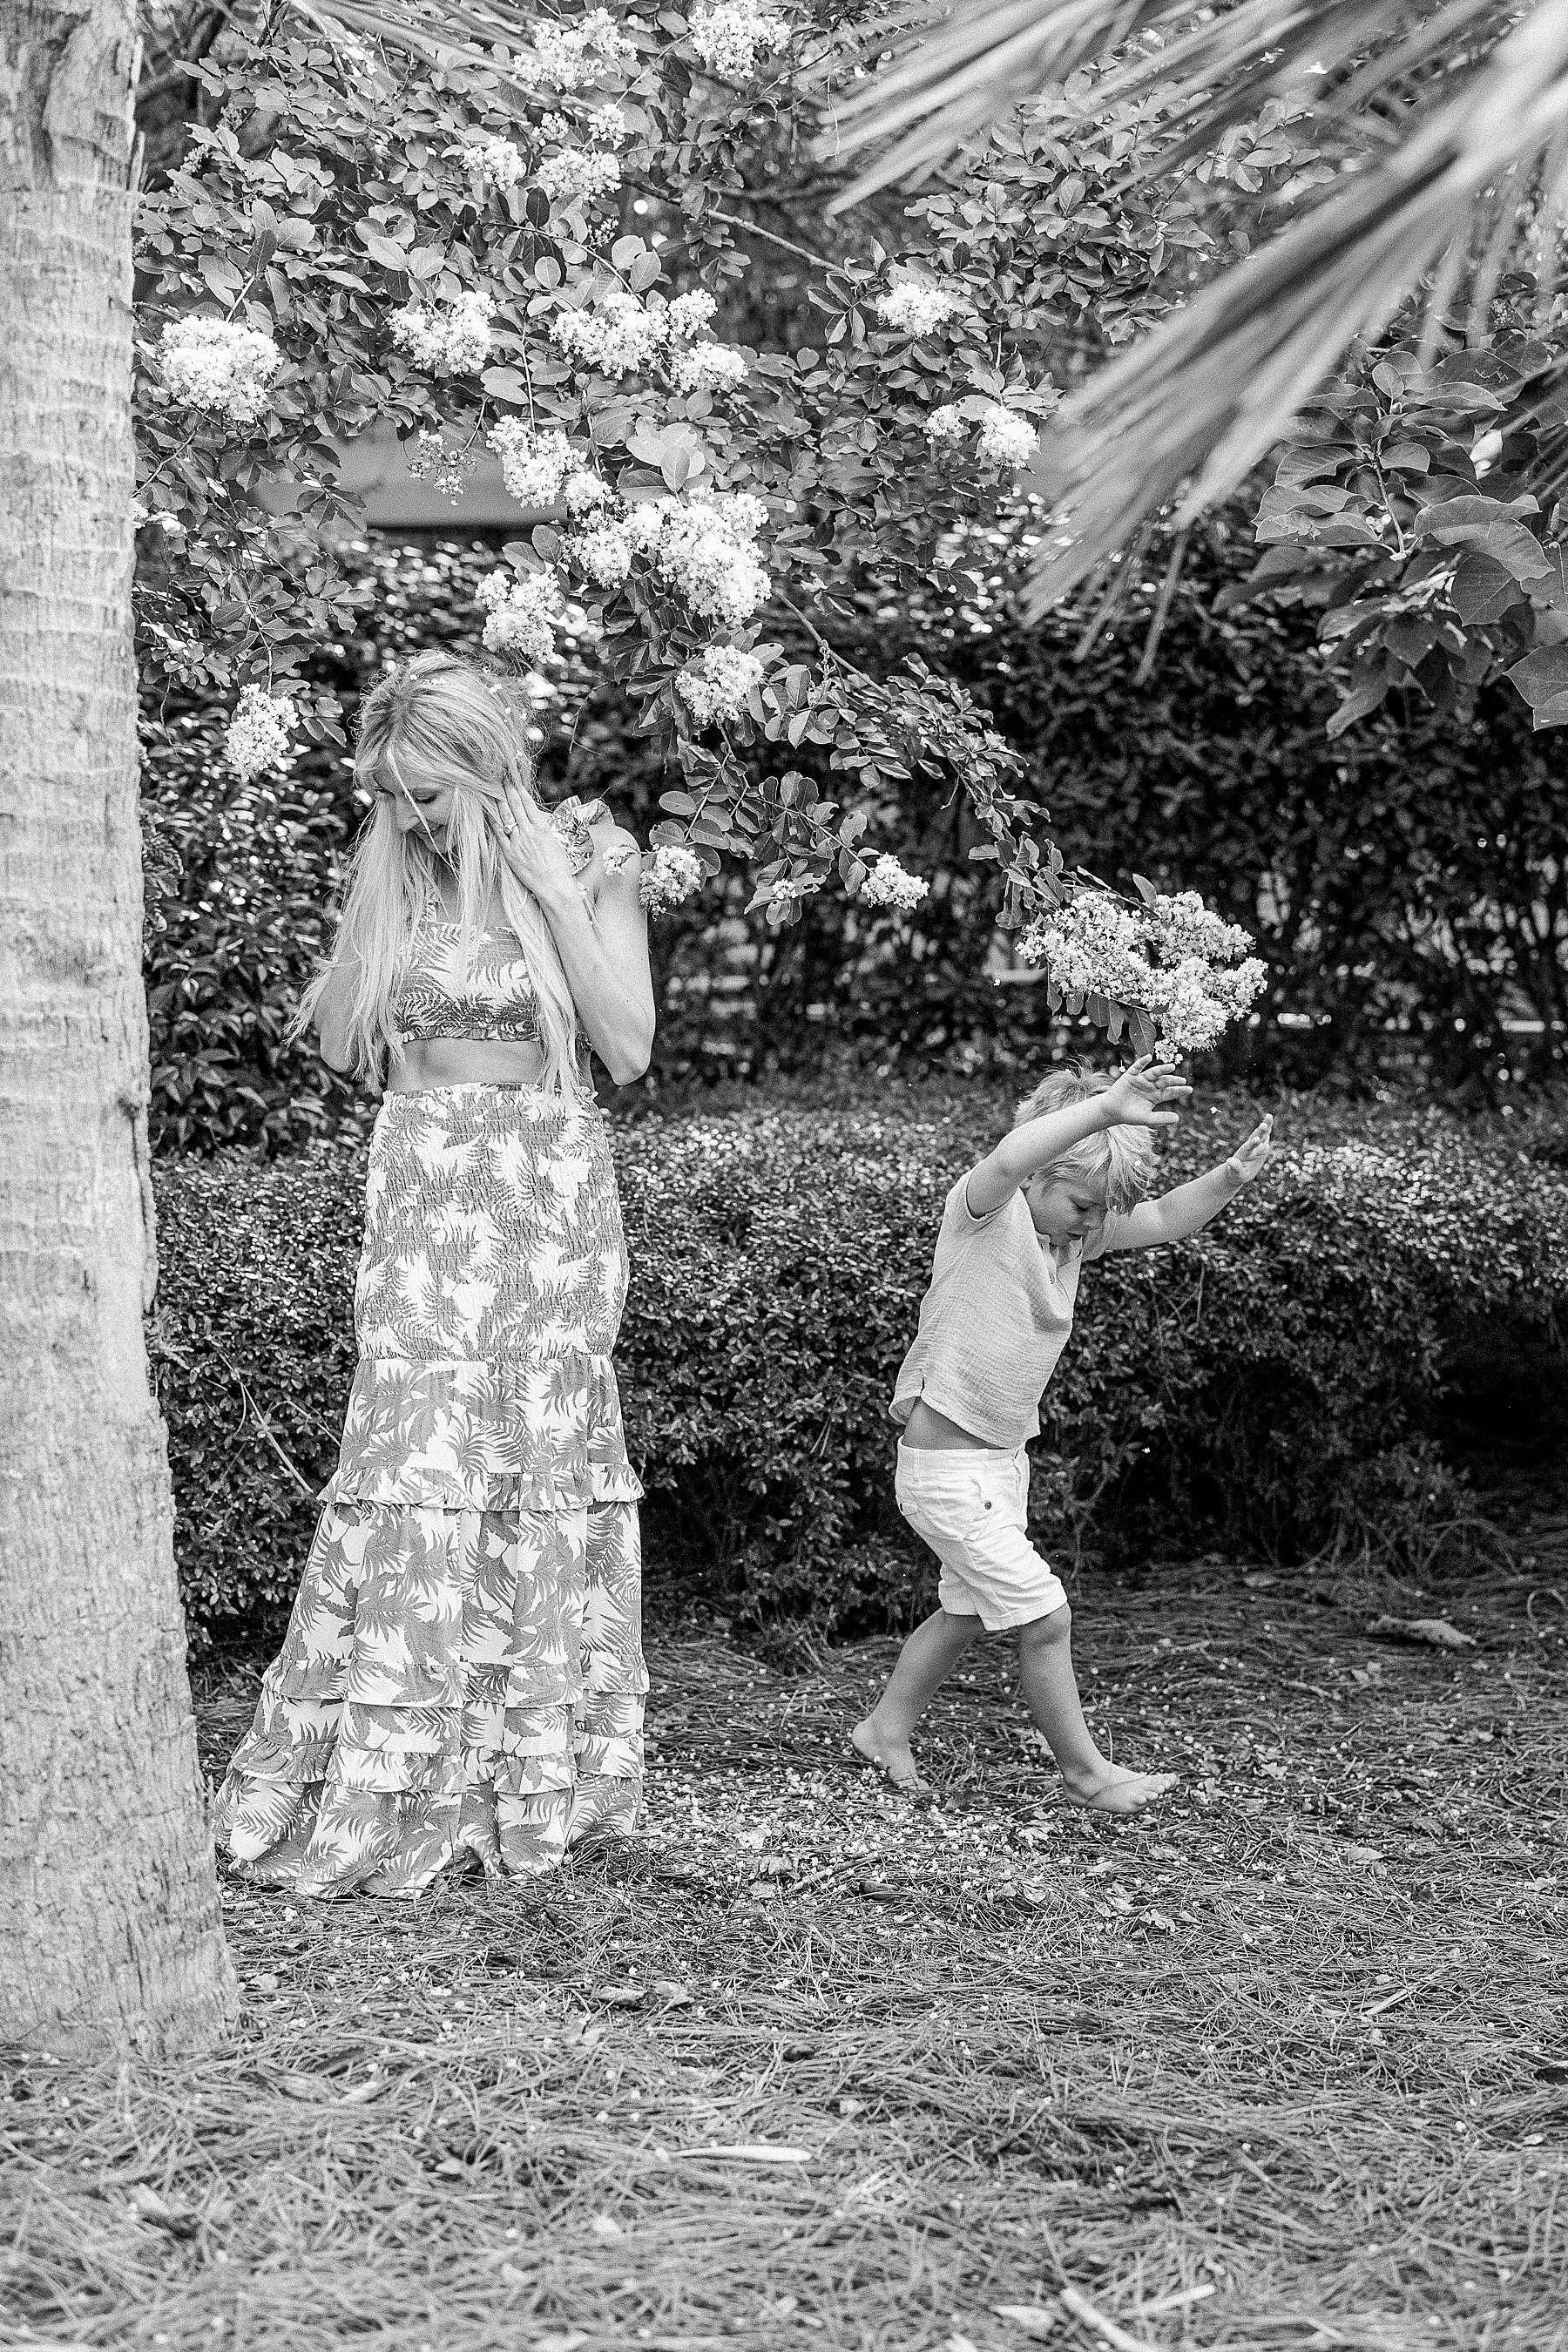 little boy dancing around mom in falling white flowers wearing brown shirt and white shorts